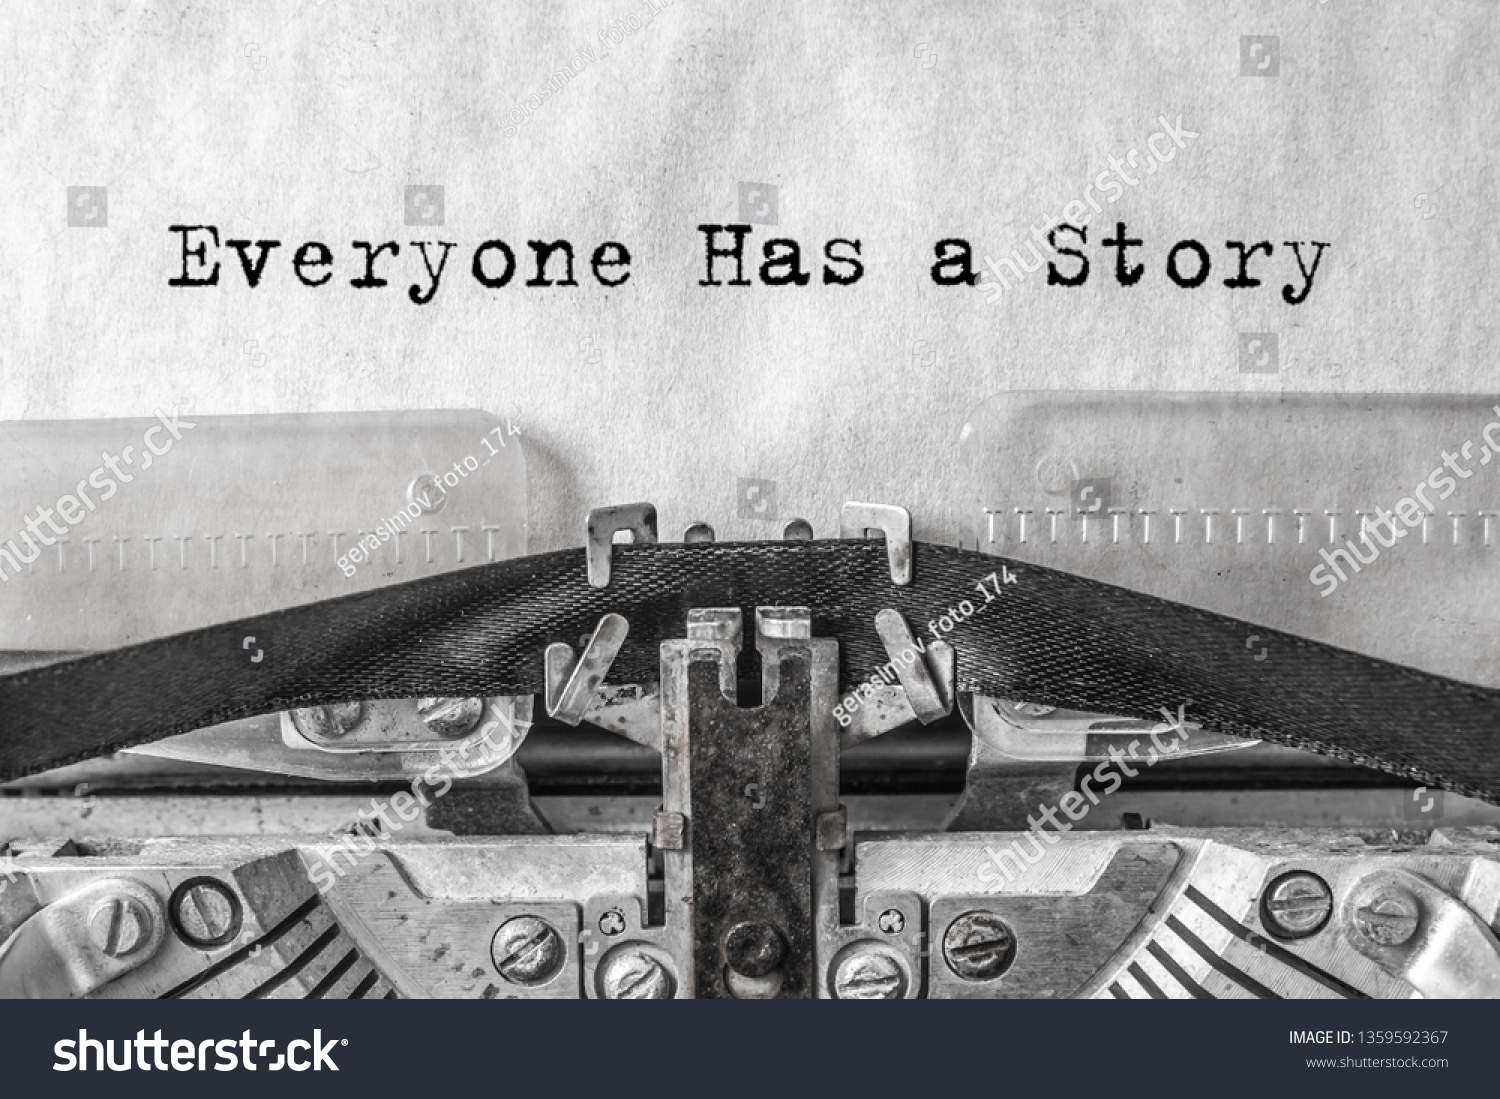 Everyone Has a Story typed words on a vintage typewriter #1359592367